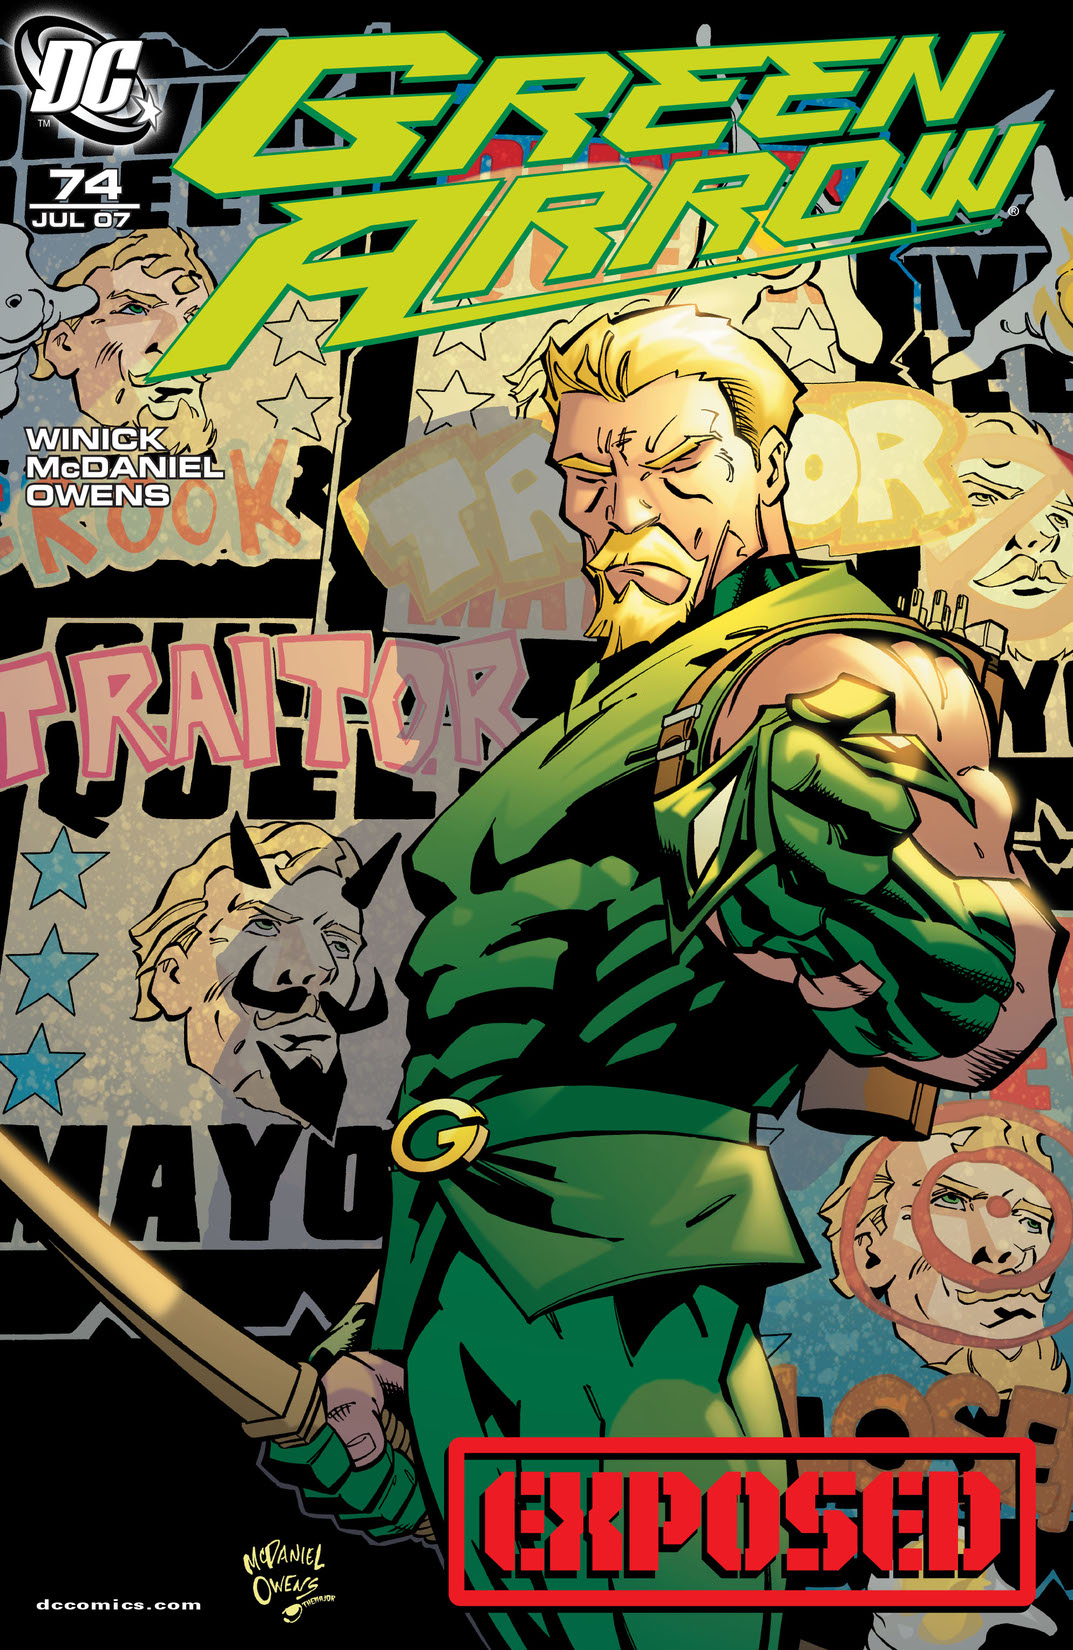 Green Arrow (2001-) #74 preview images